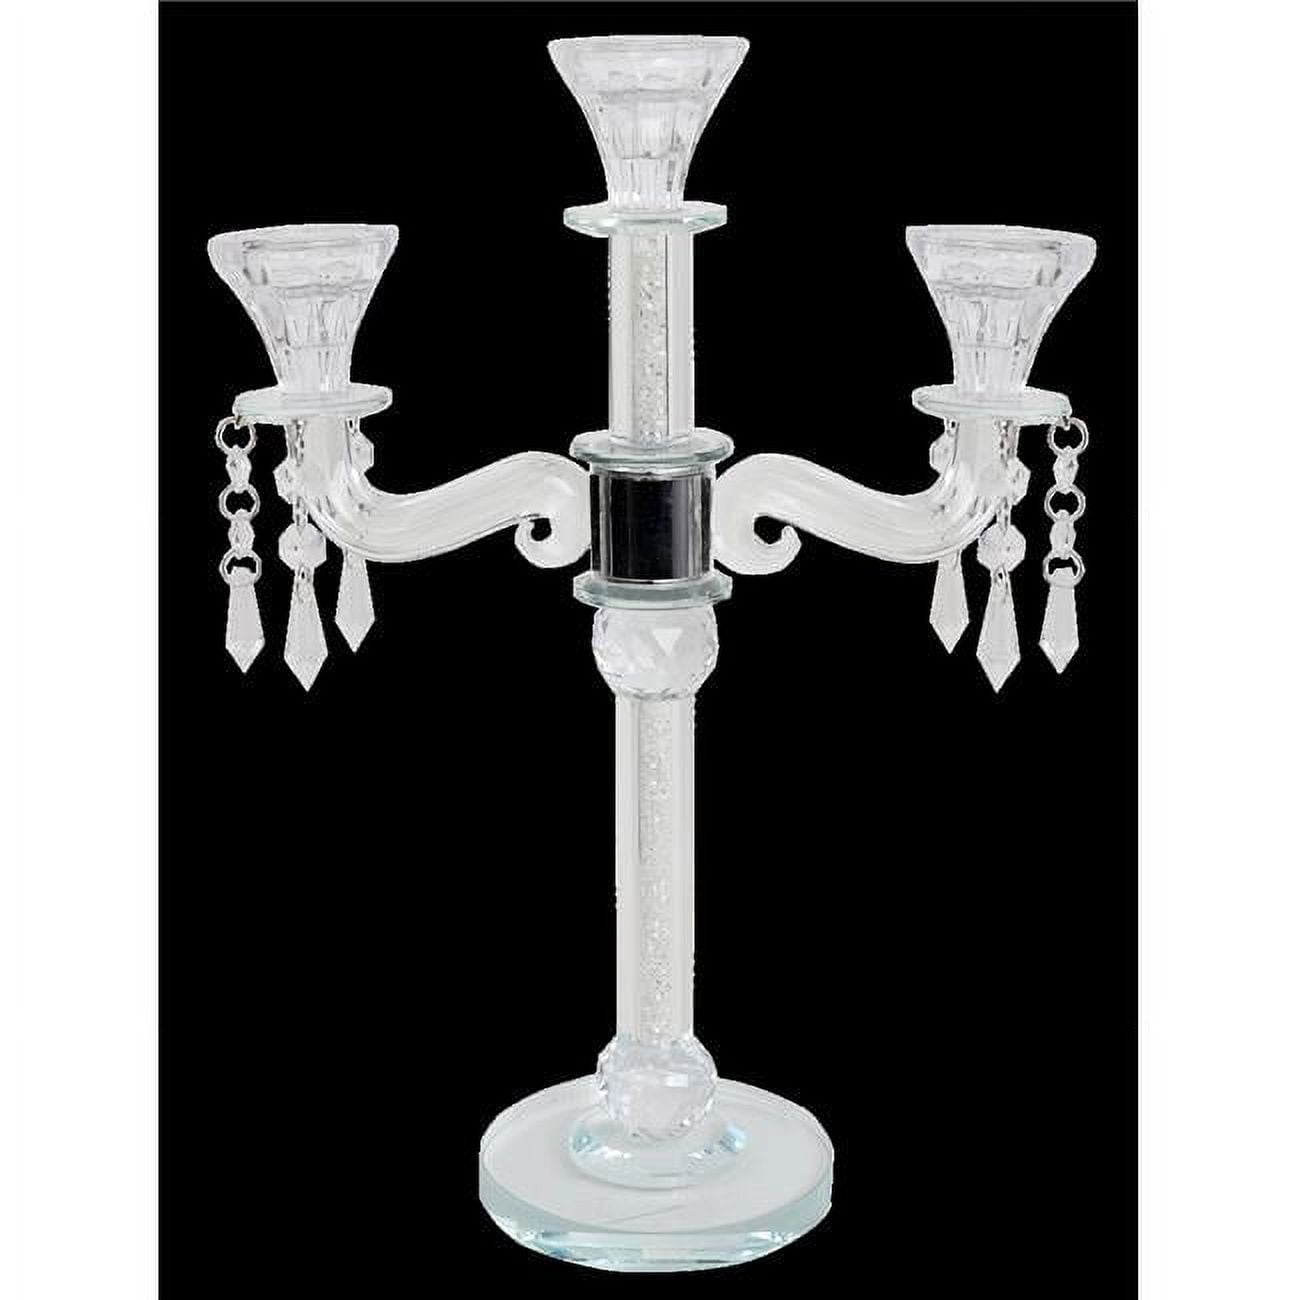 Picture of Schonfeld Collection 16676 15 in. Crystal Candelabra with Broken Glass, 3 Branch